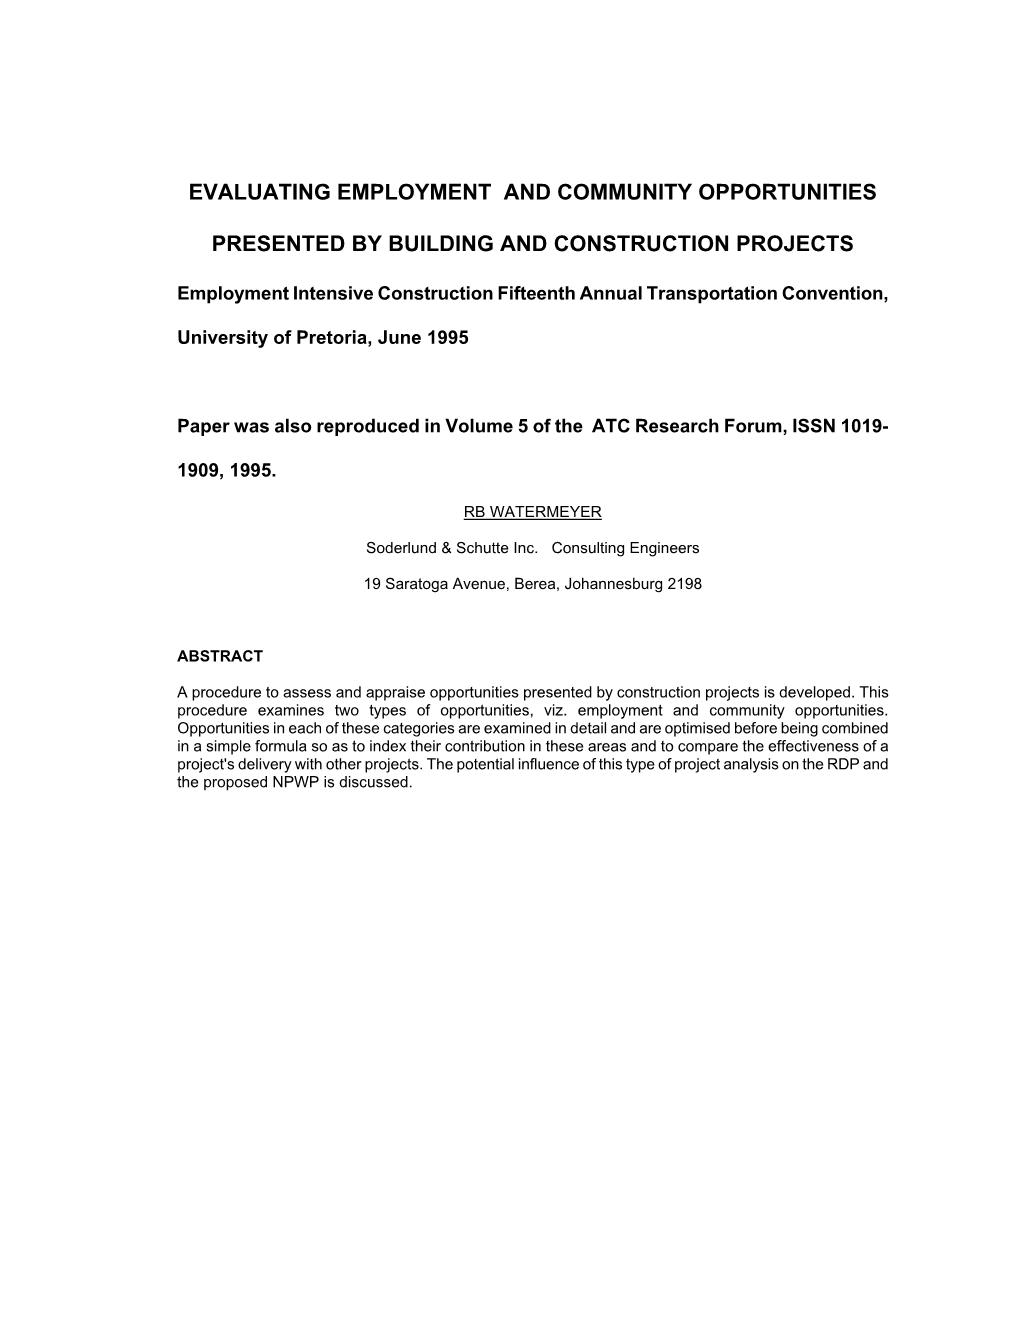 Evaluating Employment and Community Opportunities Presented